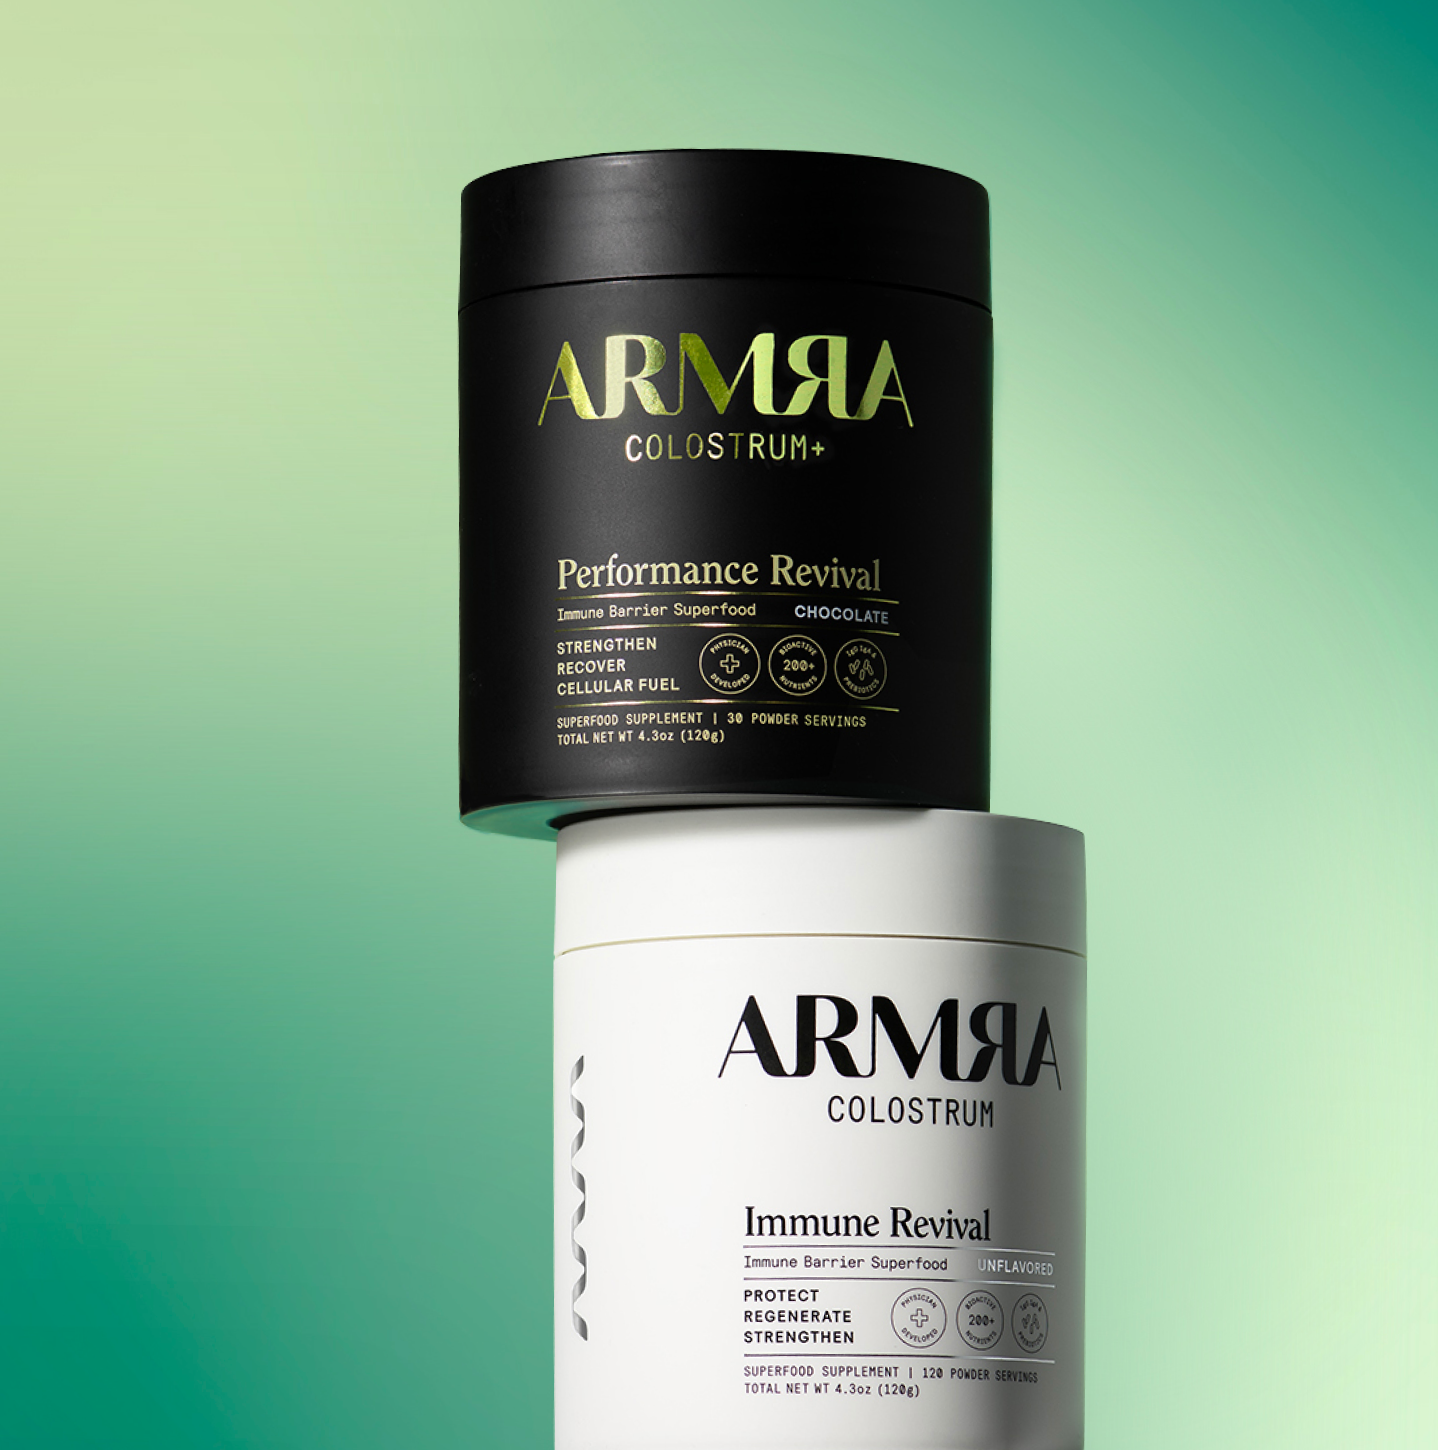 Black ARMRA Colostrum Performance Revival Jar stacked on top of White ARMRA Colostrum Immune Revival Jar 